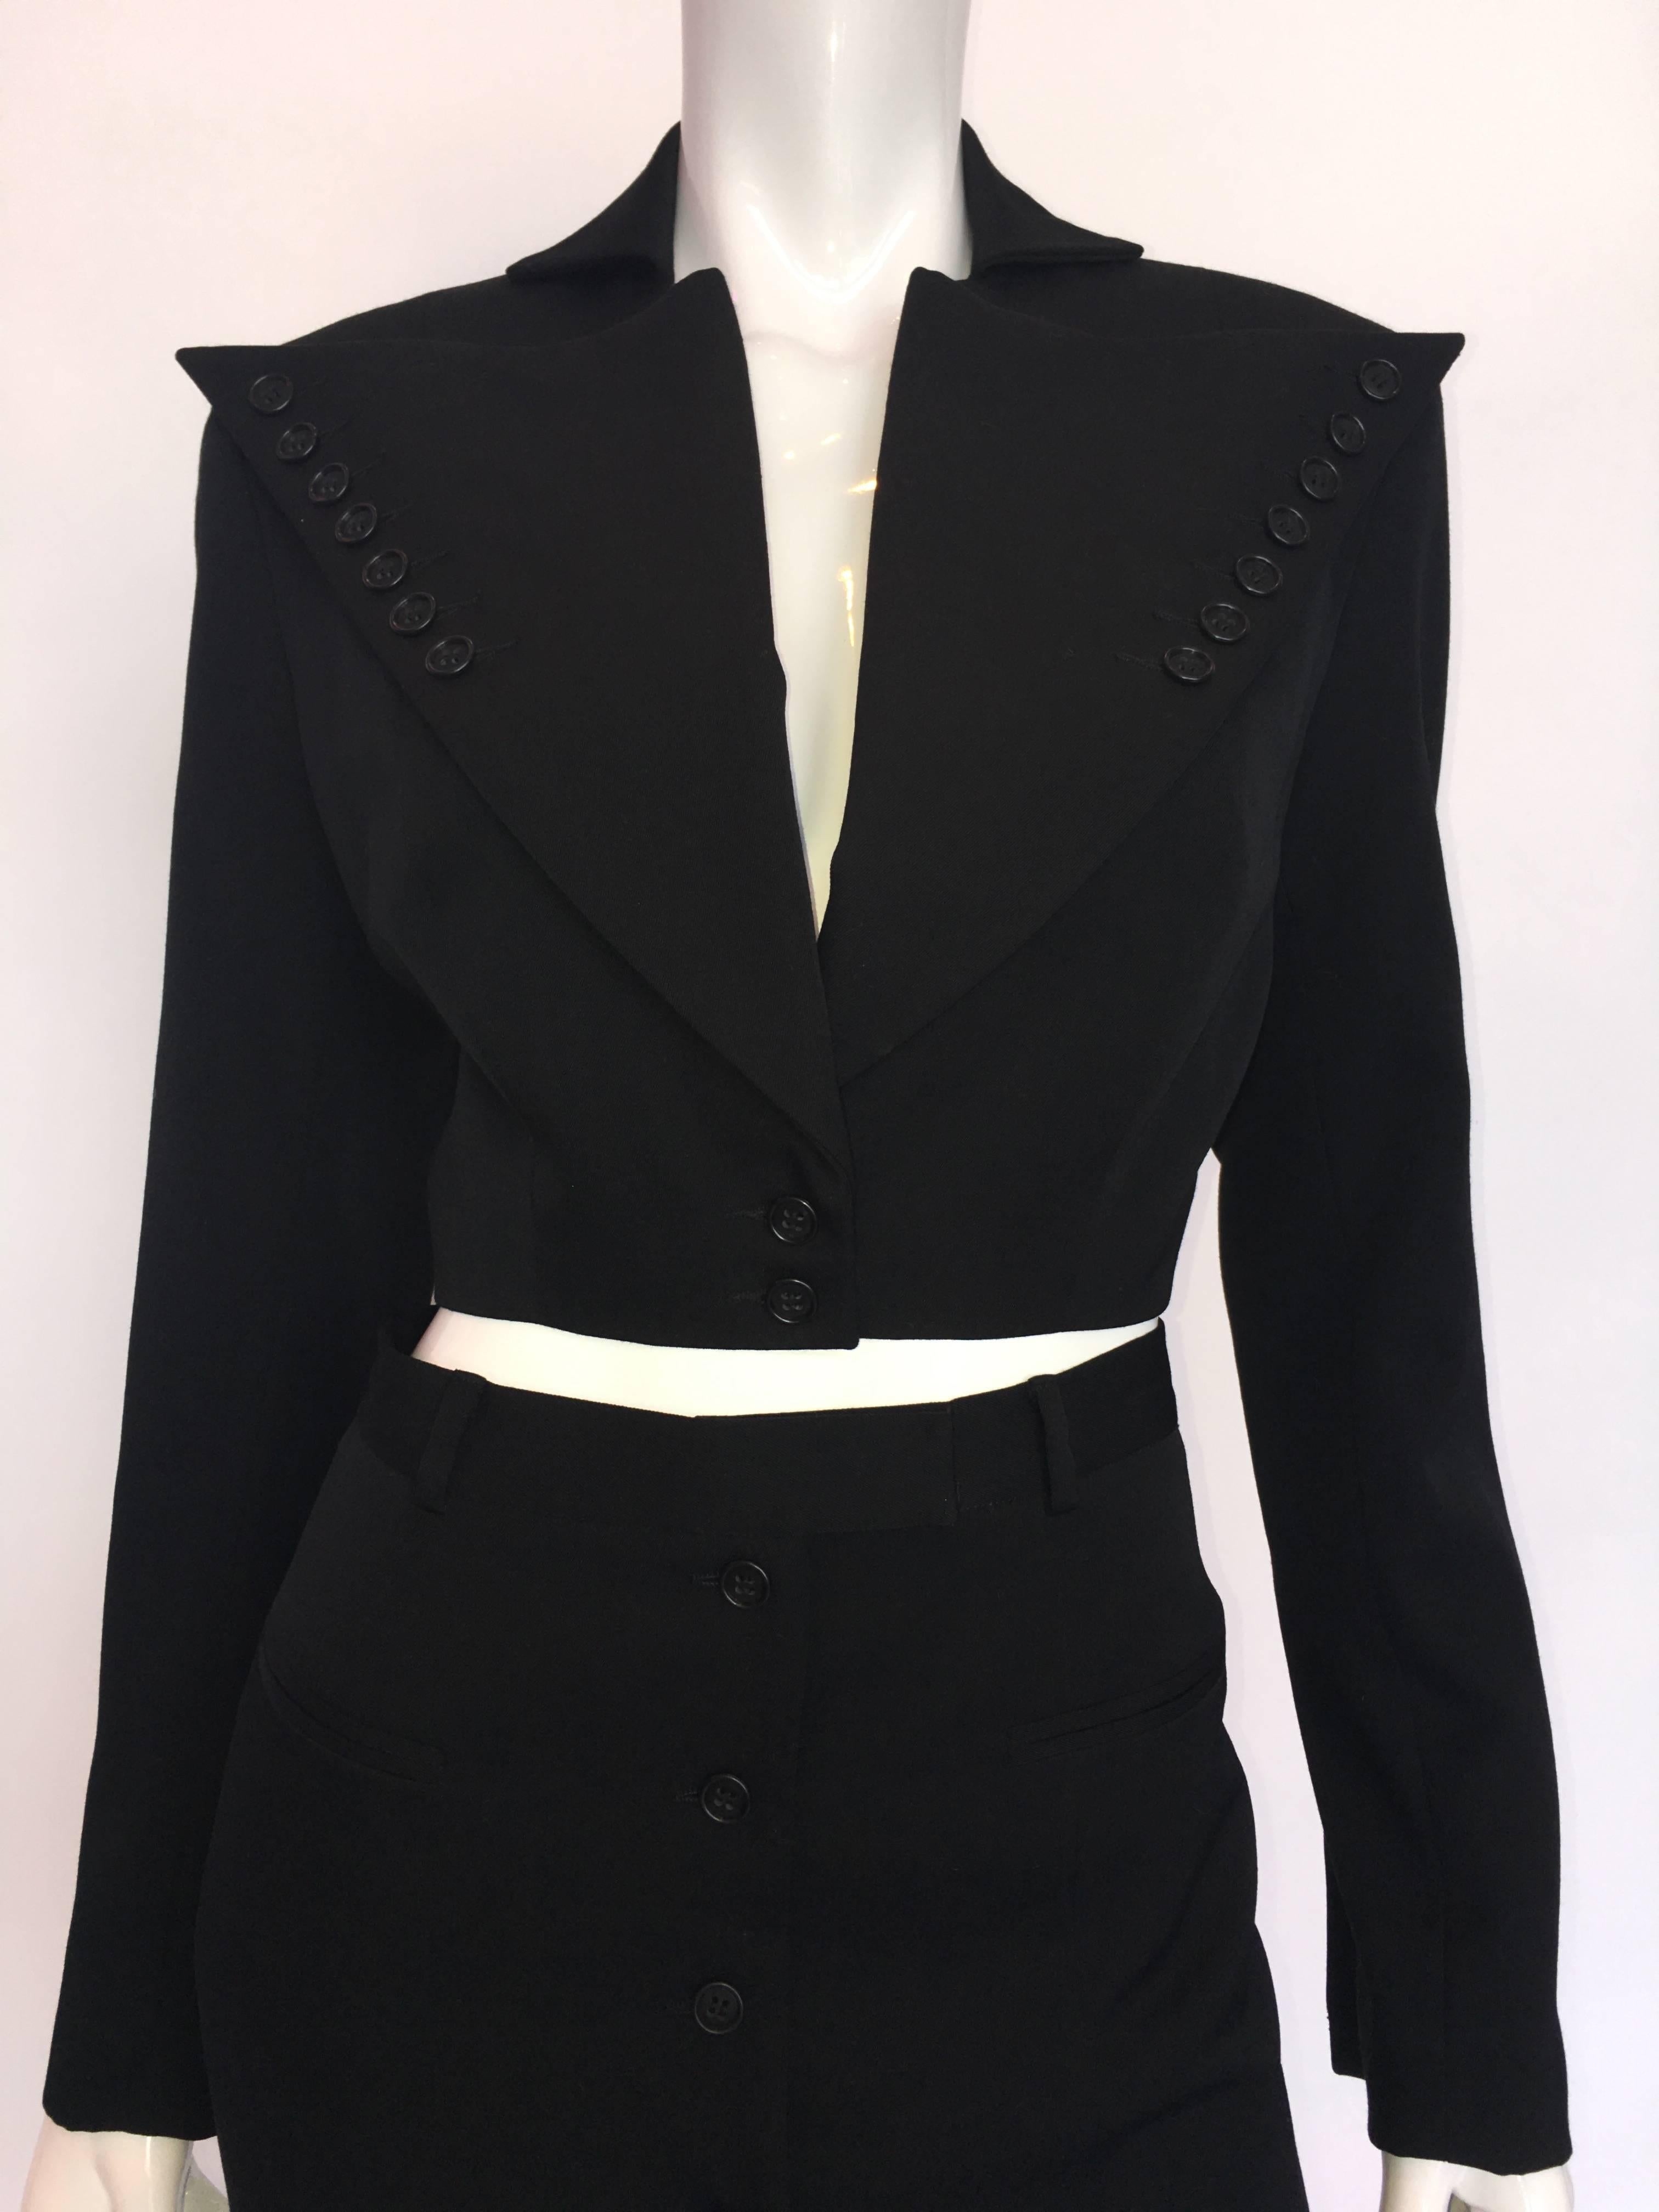 1980s OMO by Norma Kamali Black Wool Mini Skirt Suit with Button Detail

Made in USA
Size label: 6

Measurements (taken flat):
Jacket:
Shoulders - seam to seam: 17